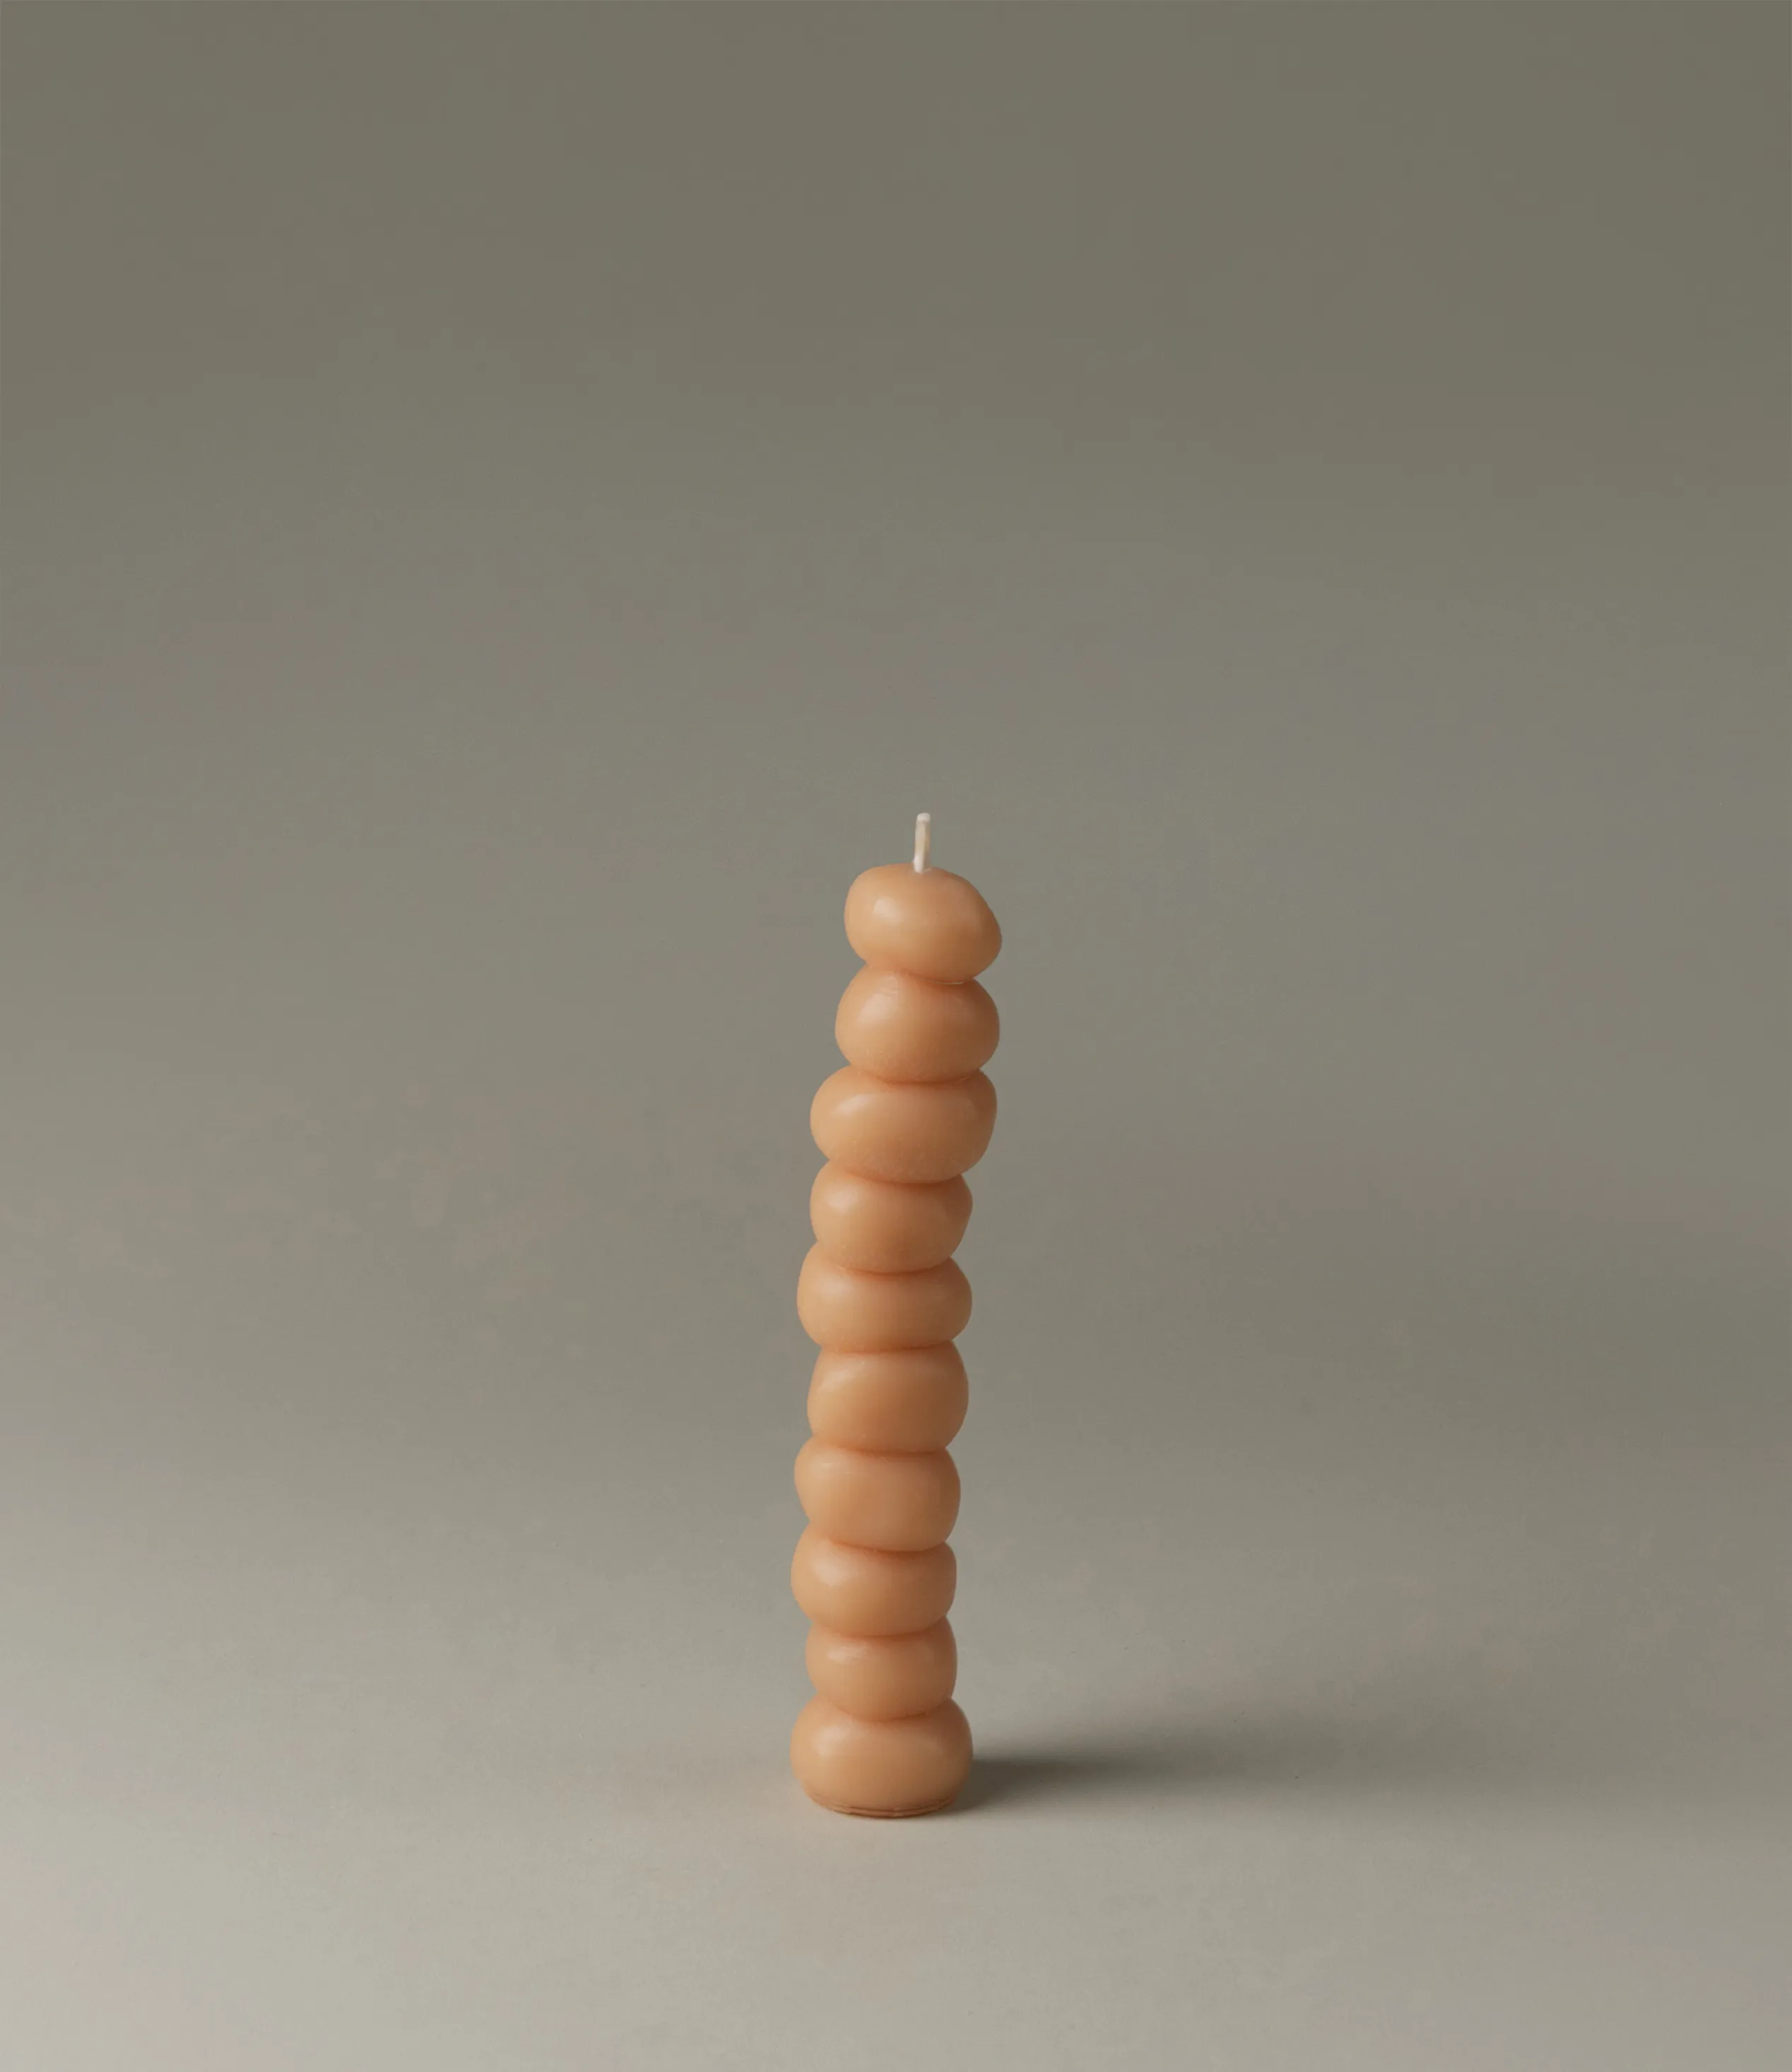 Grape Candle from Ann Vincent has the shape of grapes stacked on top of each other. It has a light nude color.